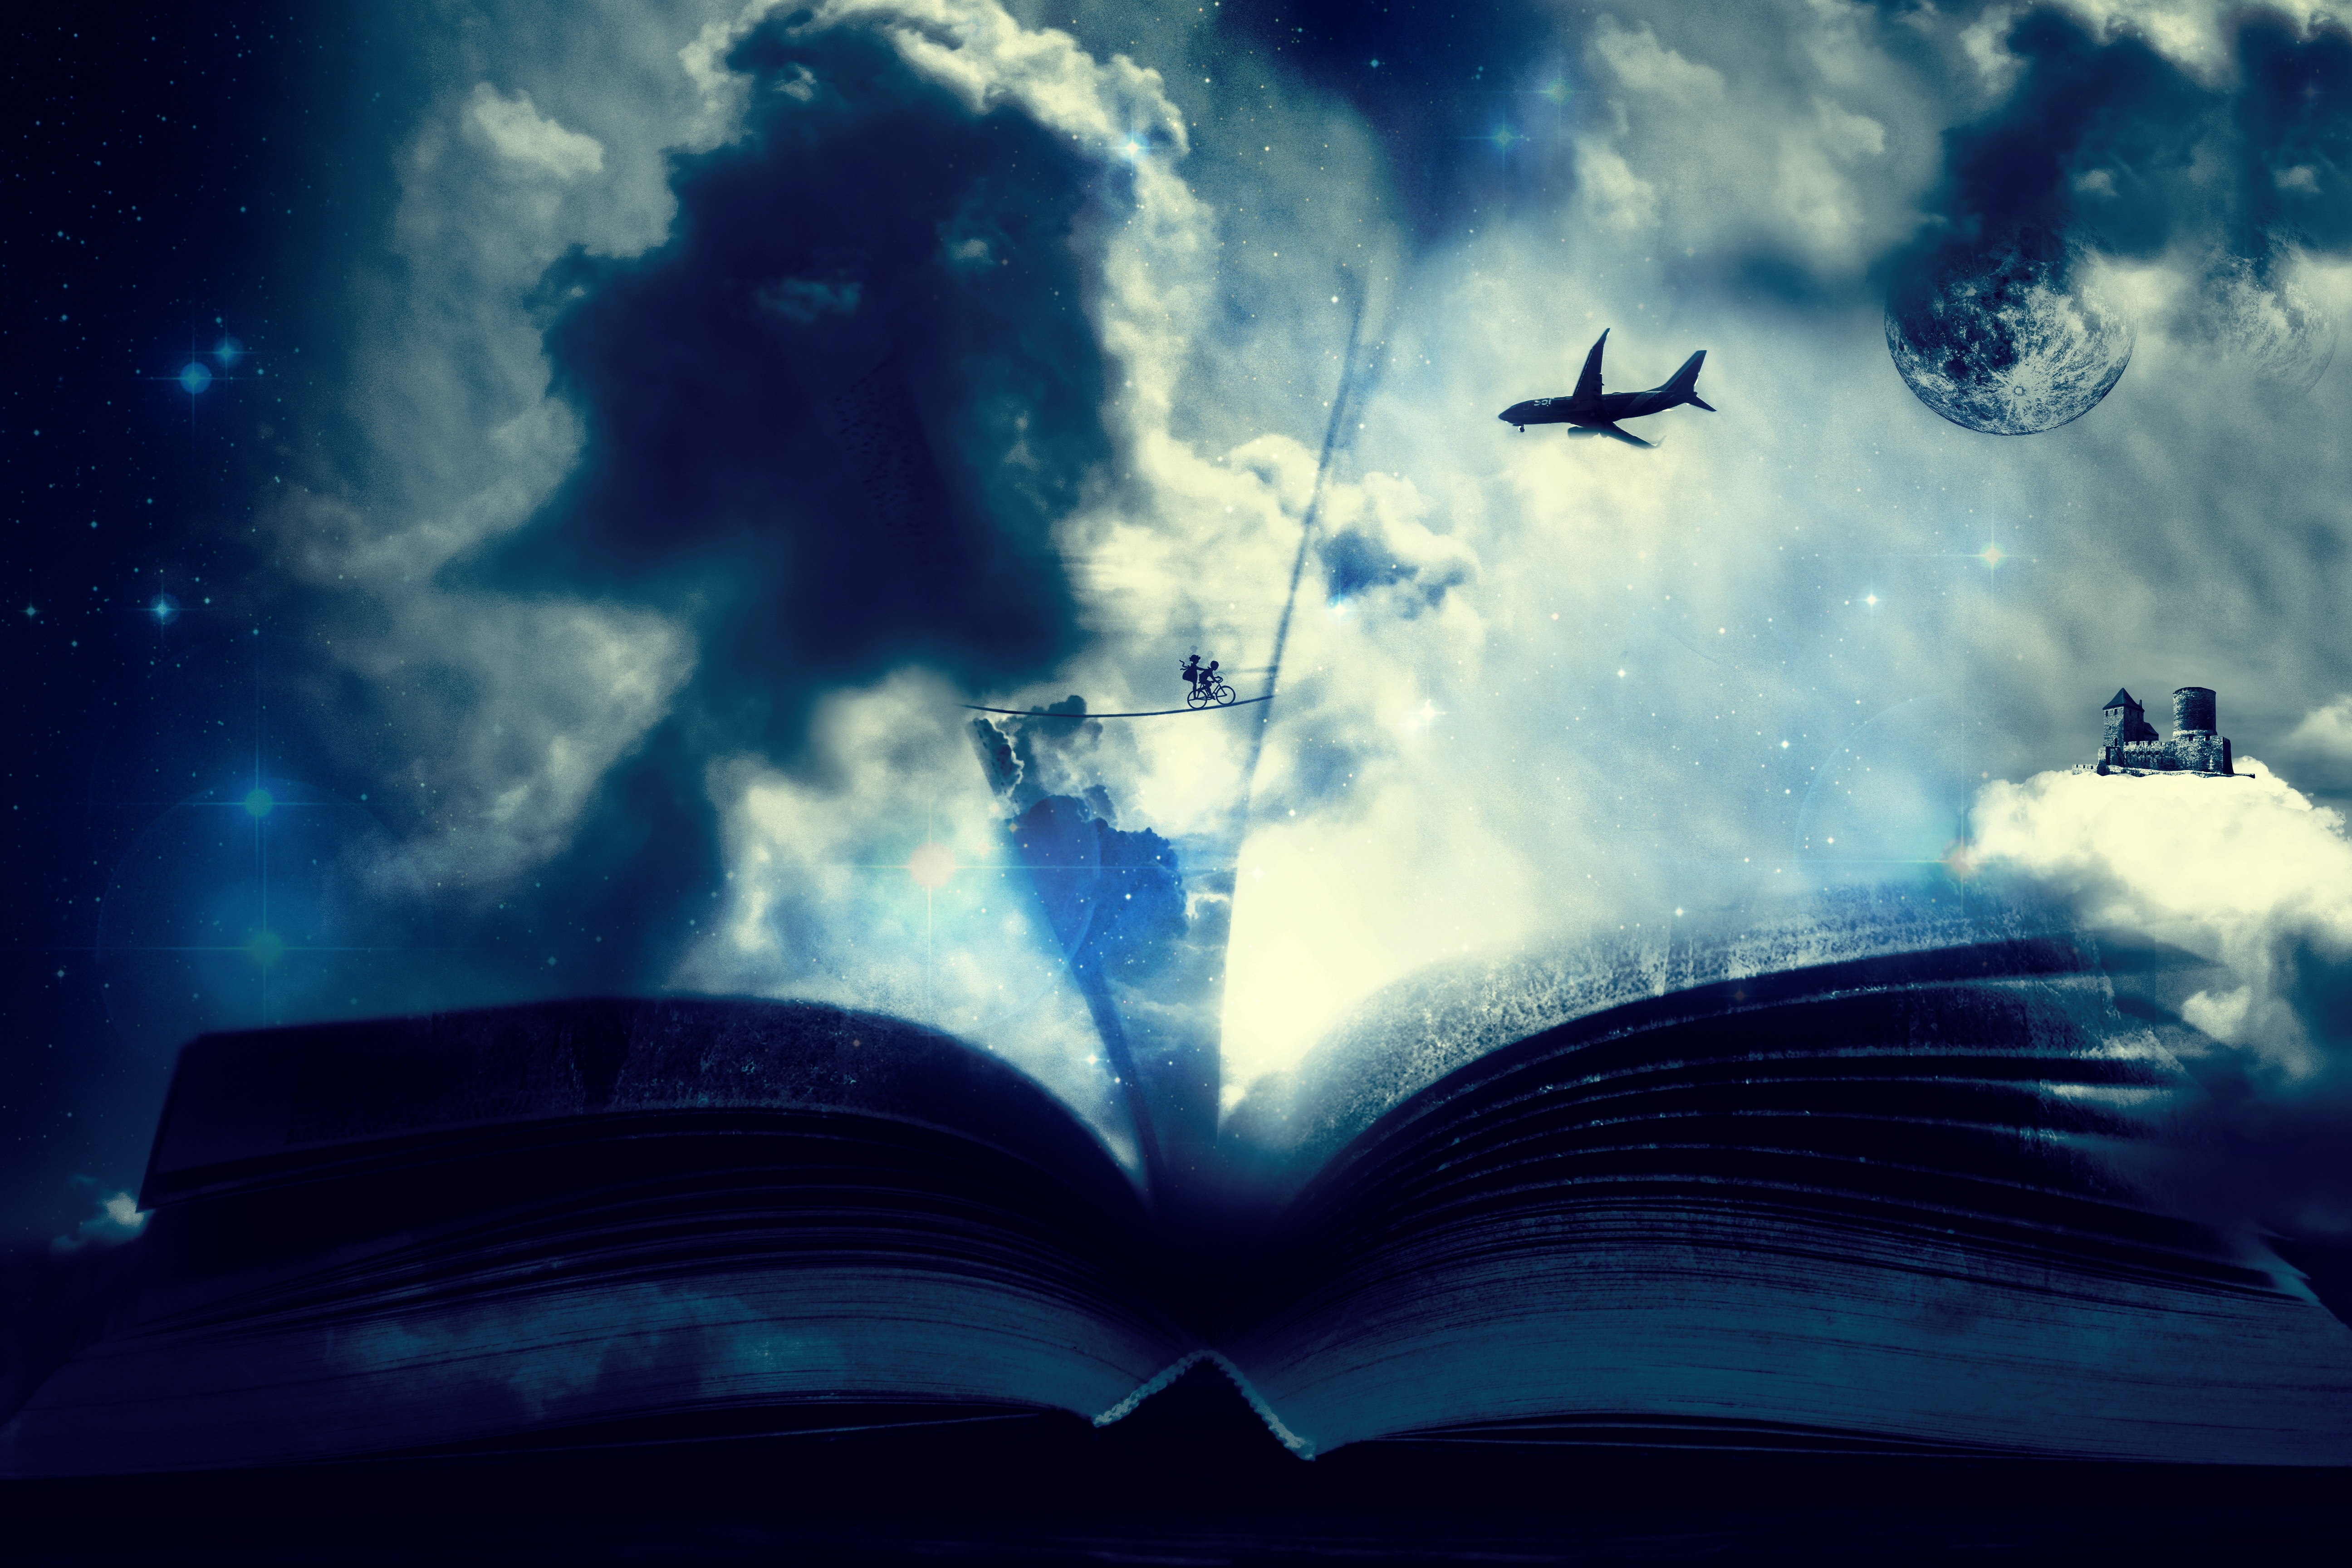 book, plane, fantasy, art, clouds, airplane, bicycle images